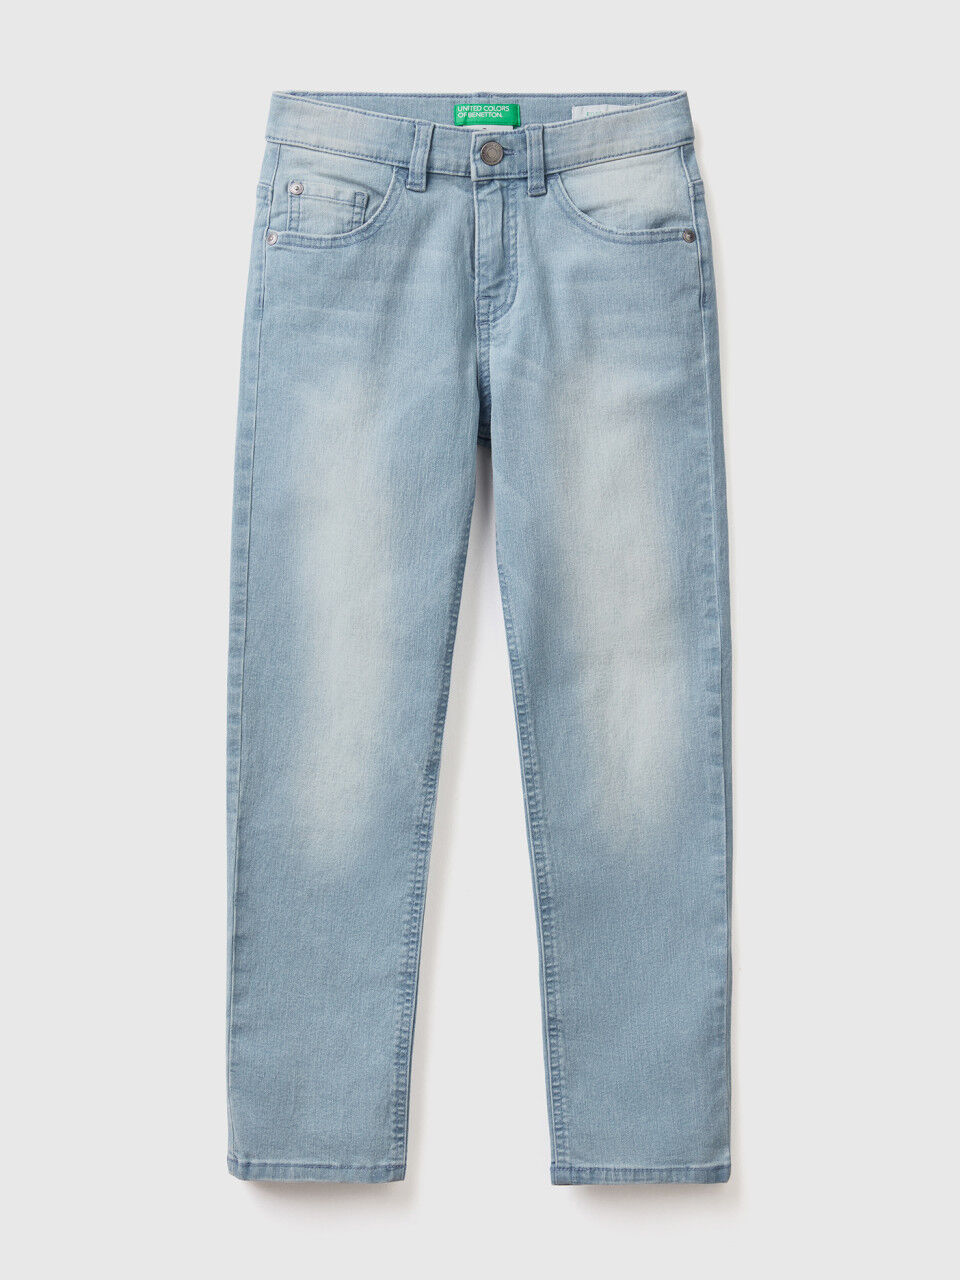 "Eco-Recycle" slim fit jeans